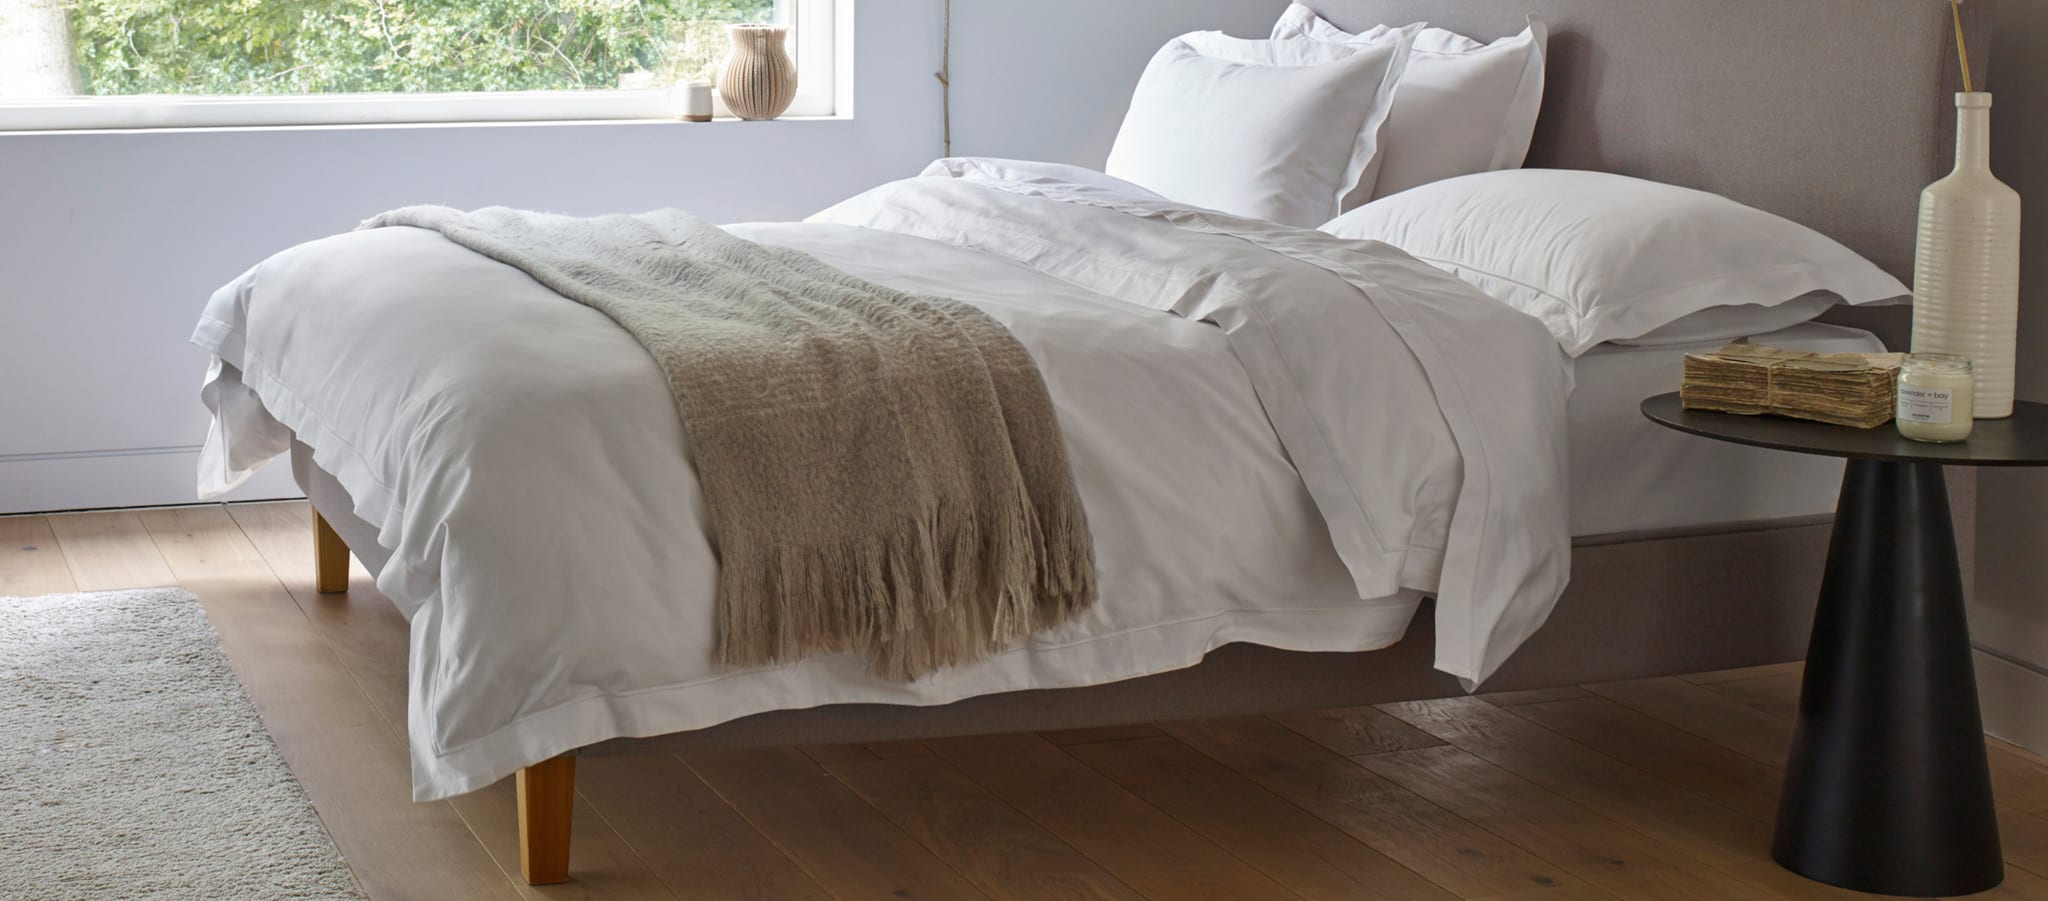 White Egyptian Cotton Bedding on Bed | scooms